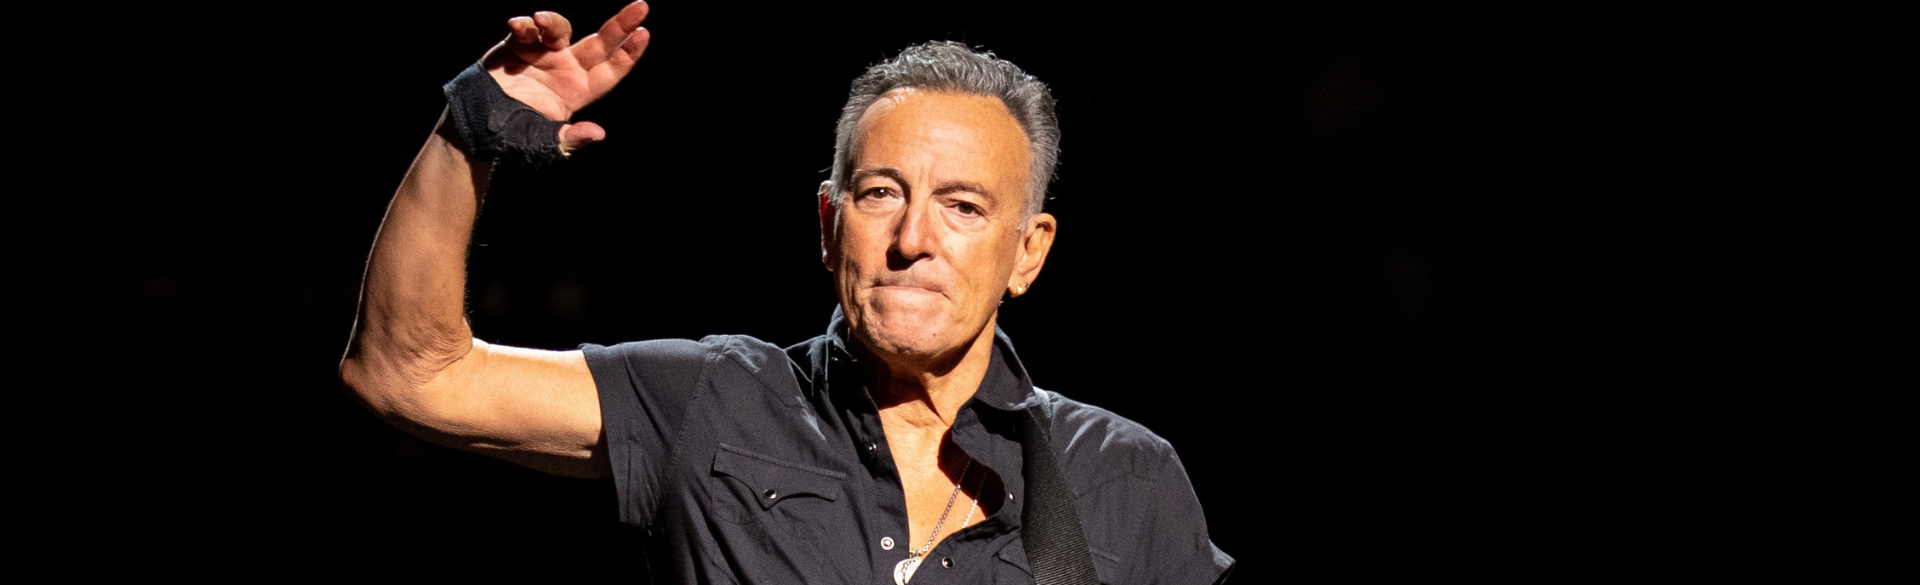 Peptic Ulcer Disease Sidelines Springsteen: What Is PUD and How Is It Treated?